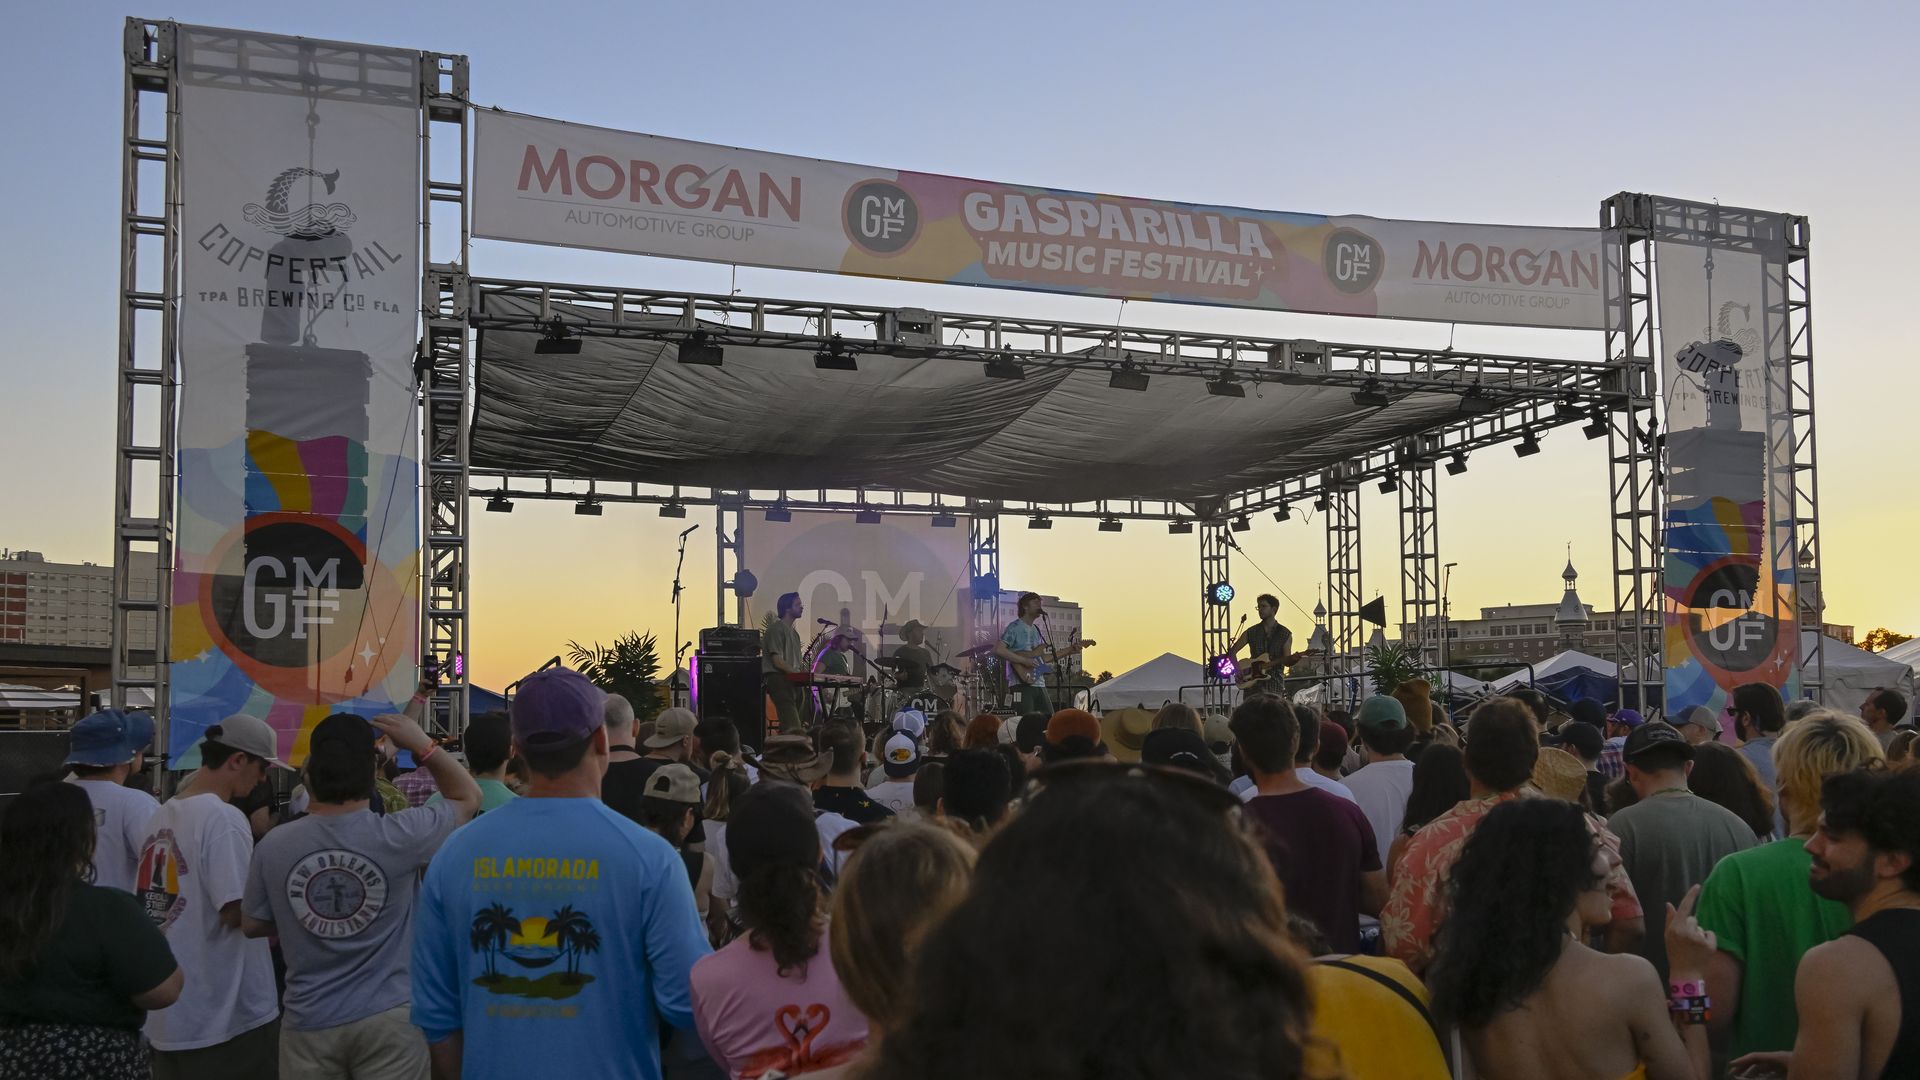 Fans watch musicians perform on a Gasparilla Music Festival stage at sunset.